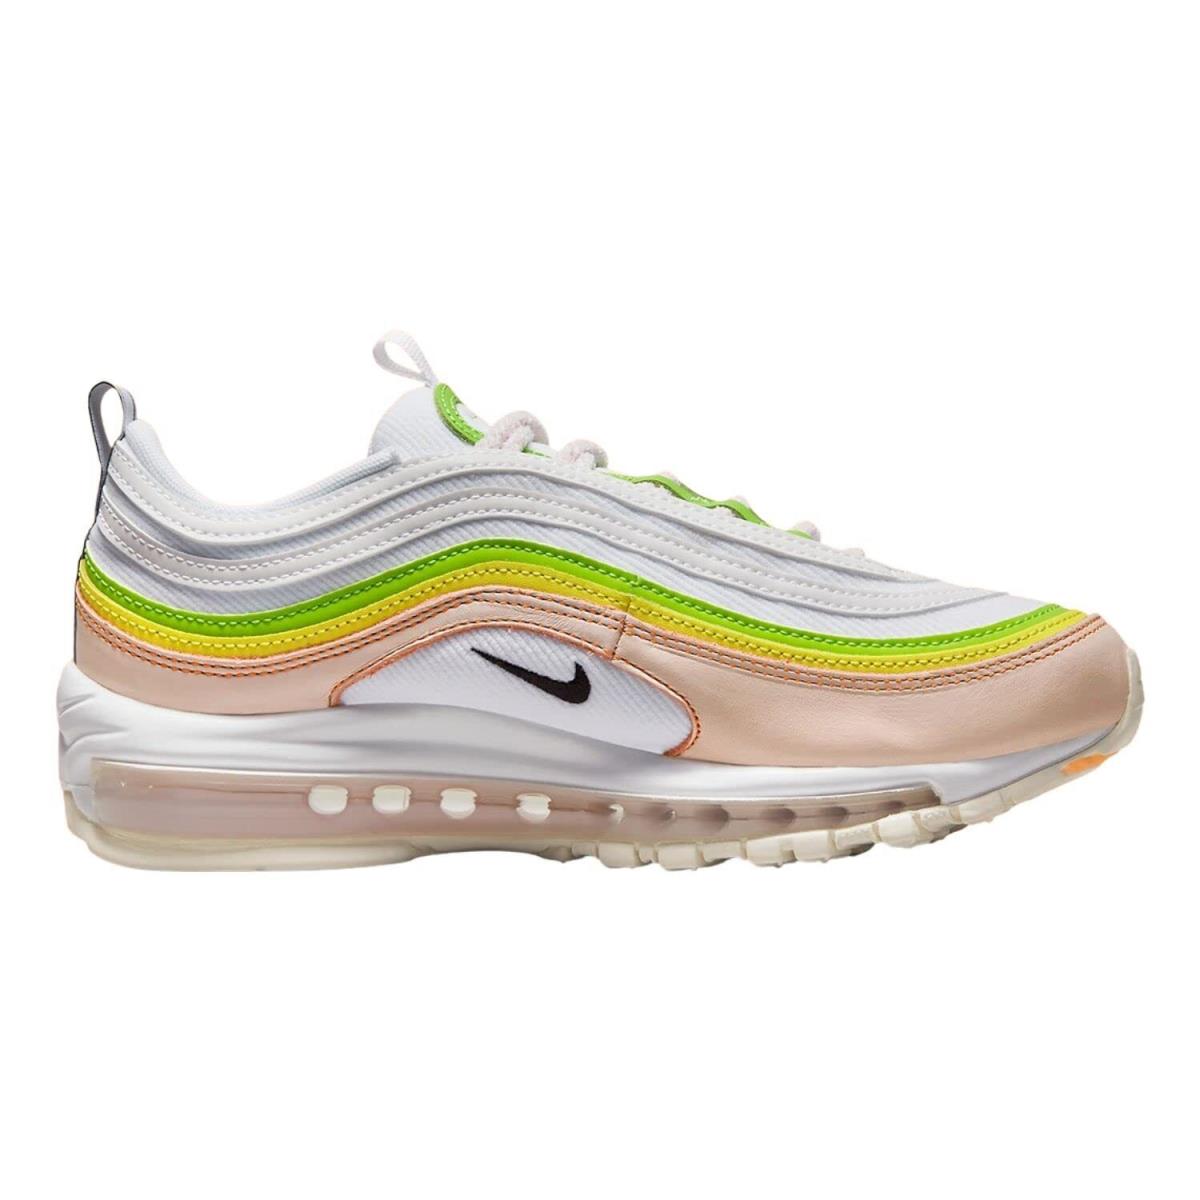 Nike Air Max 97 Womens Shoes Size- 7.5